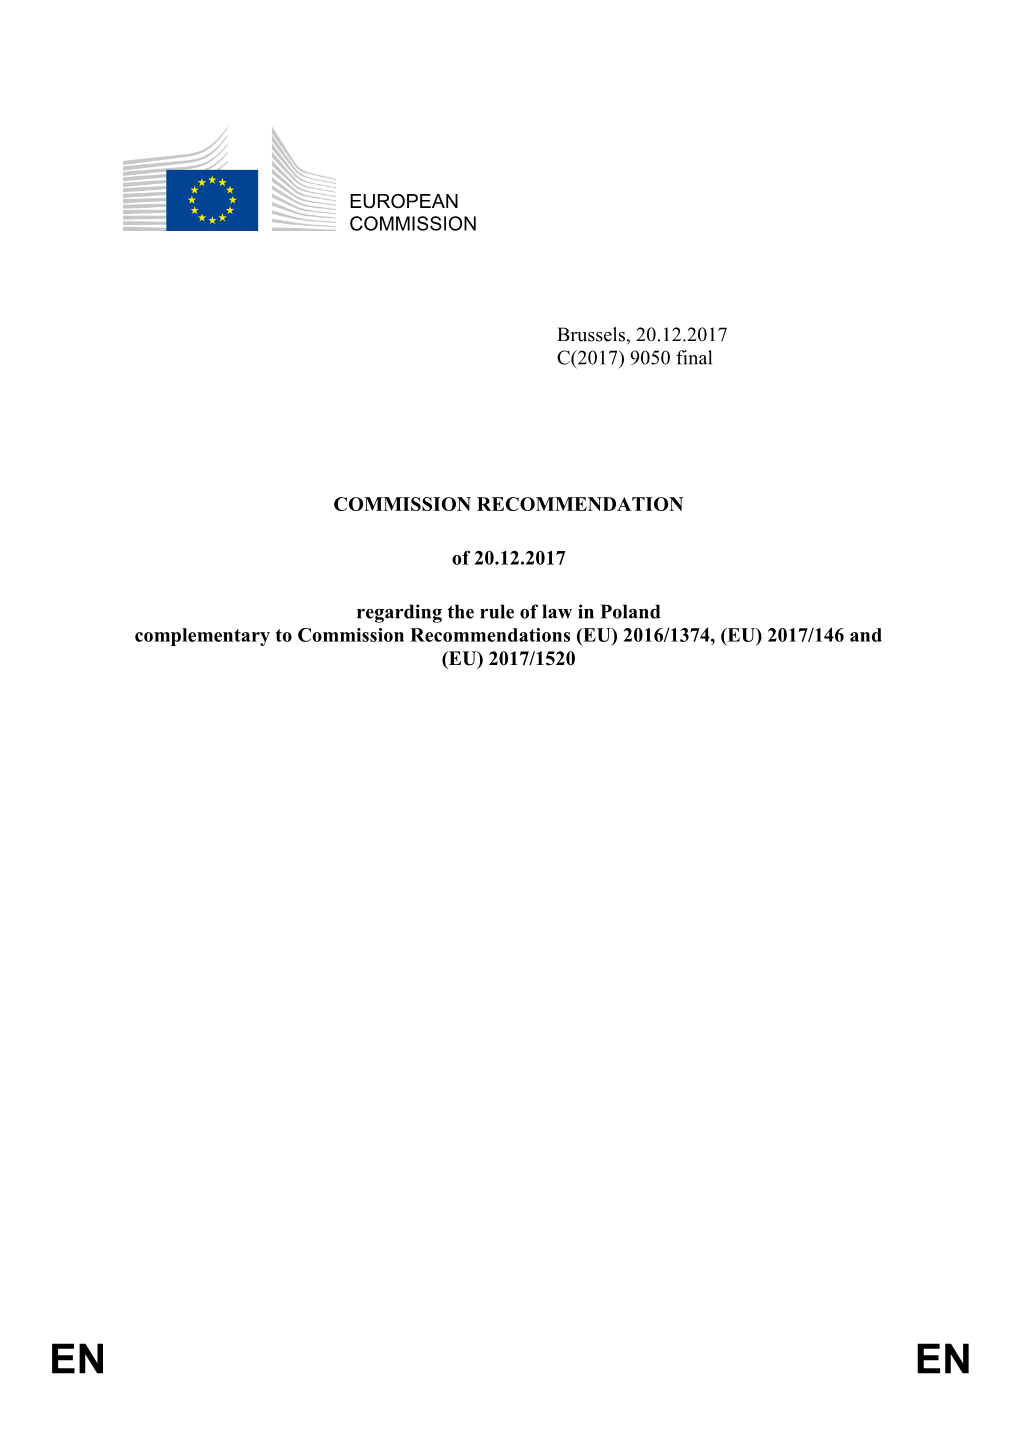 9050 Final COMMISSION RECOMMENDATION of 20.12.2017 Regarding the Rule of Law In